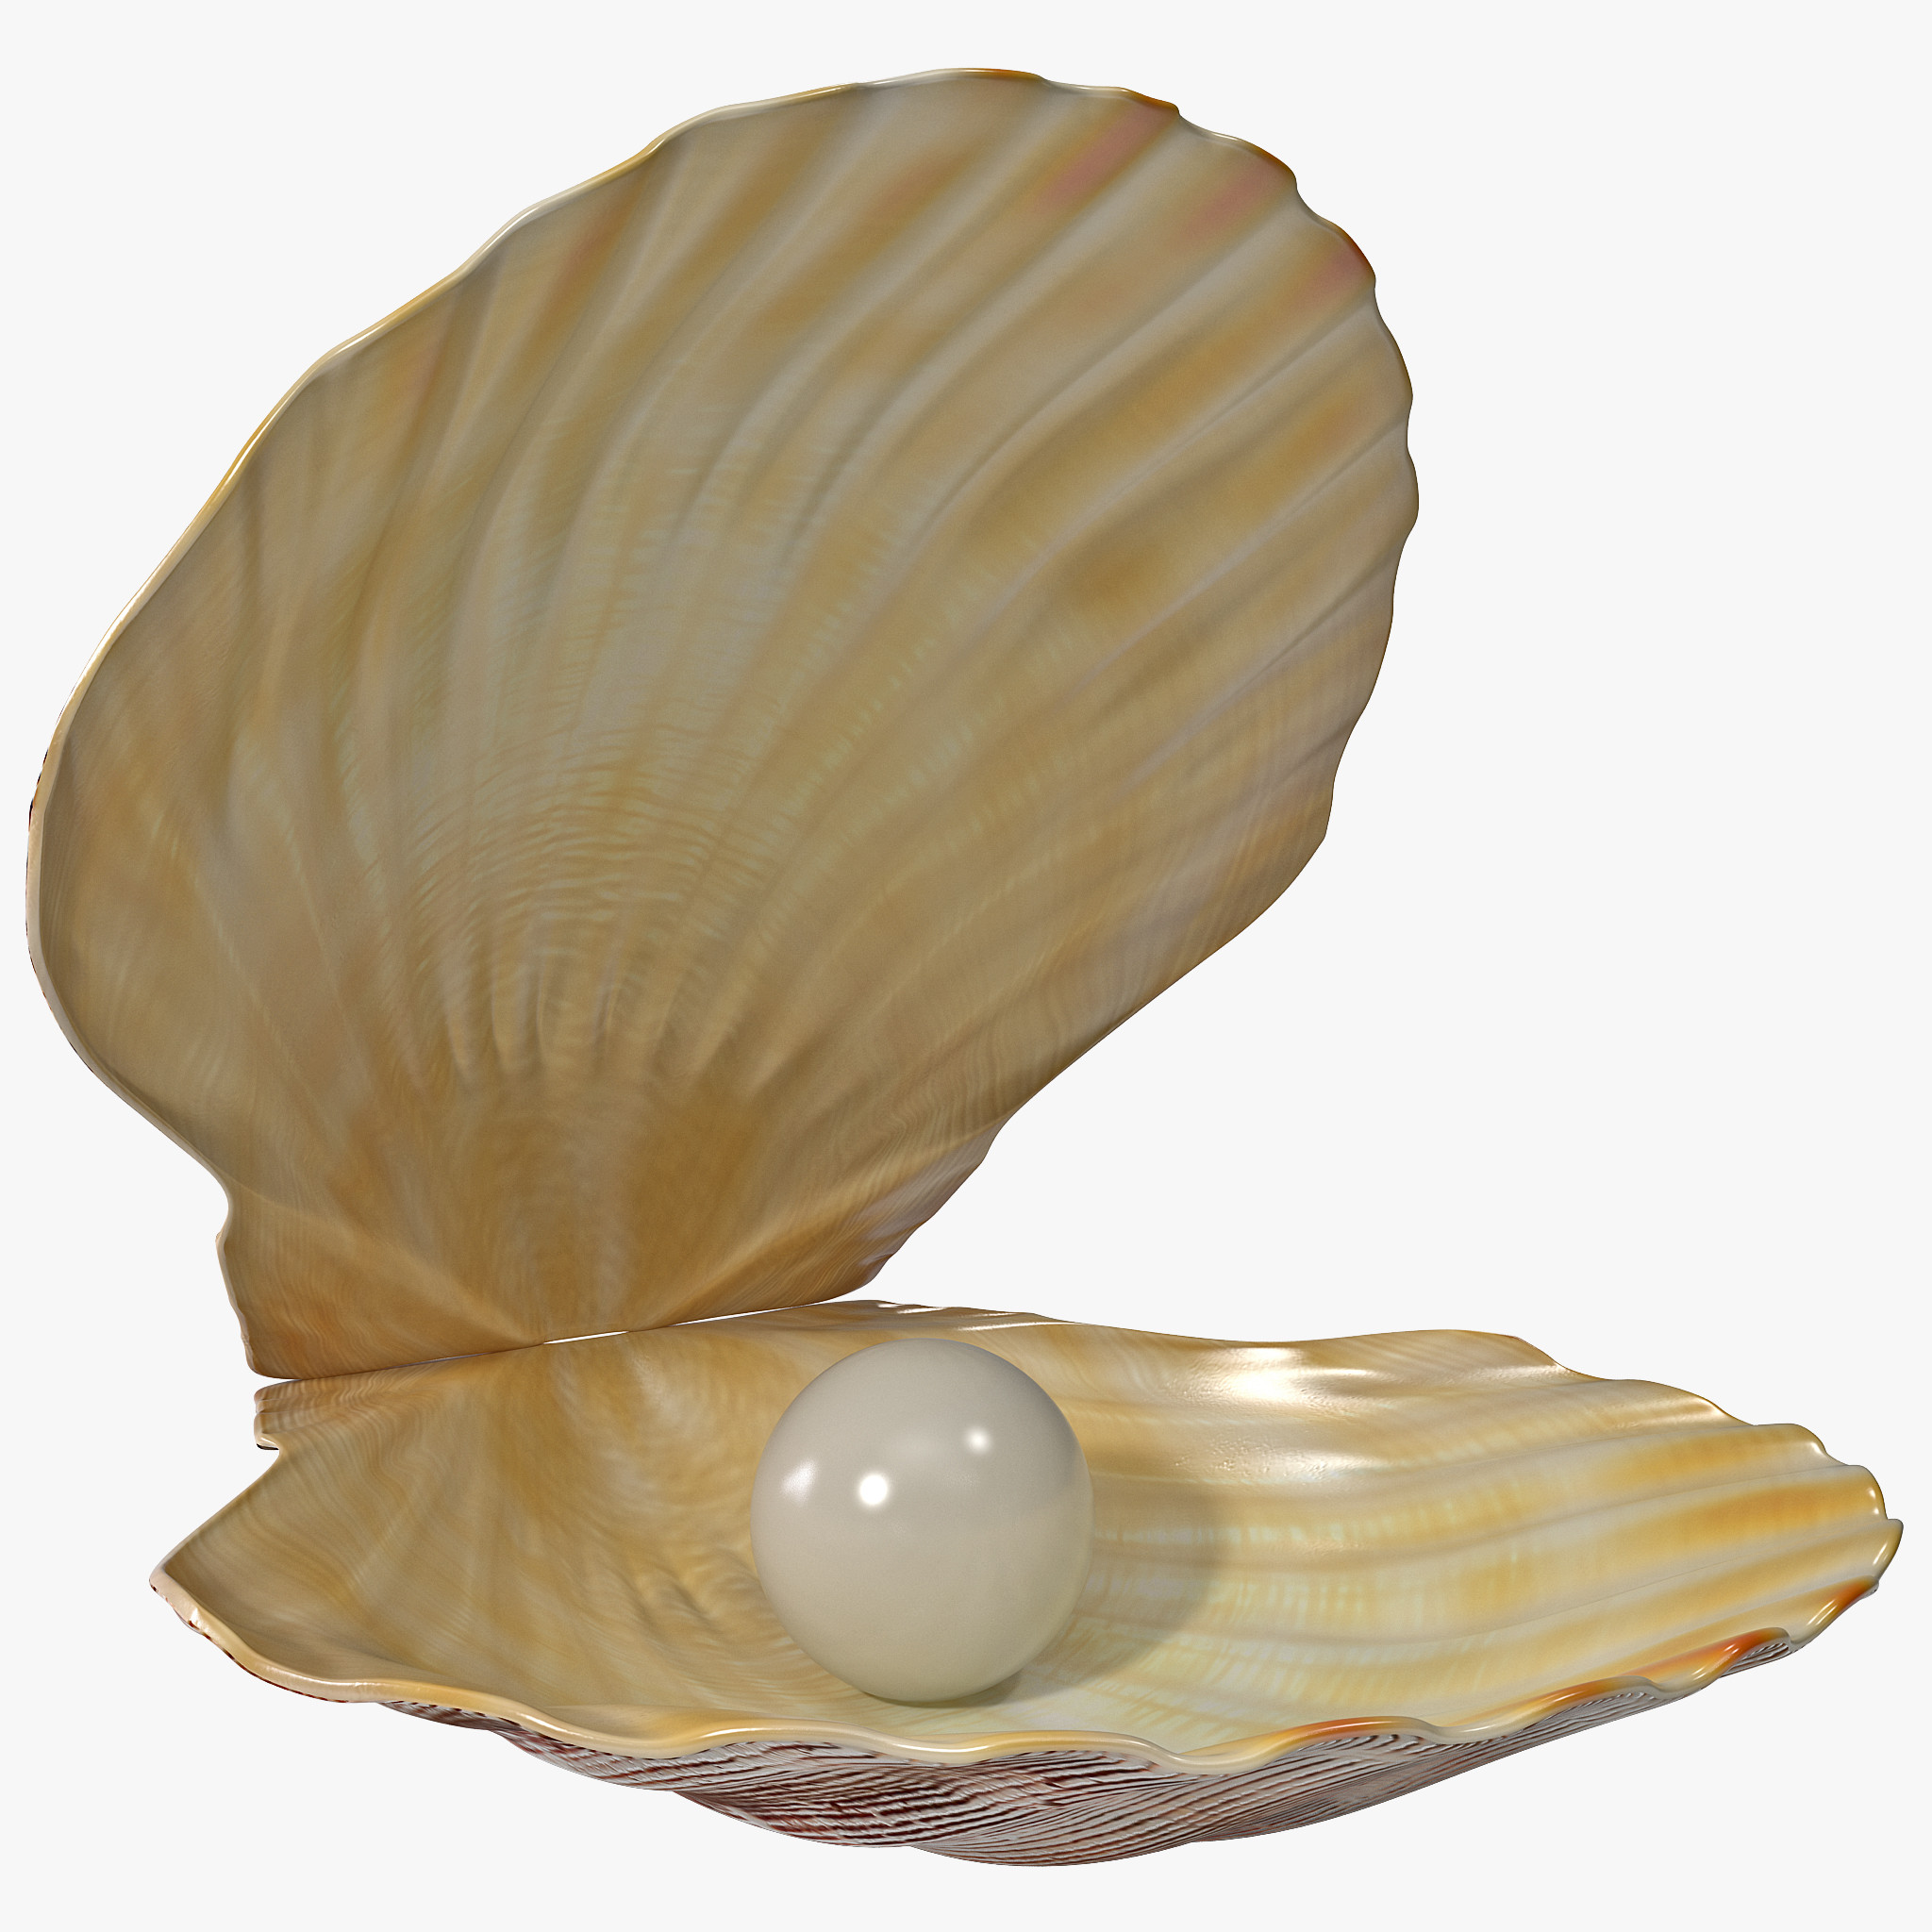 clam shell png